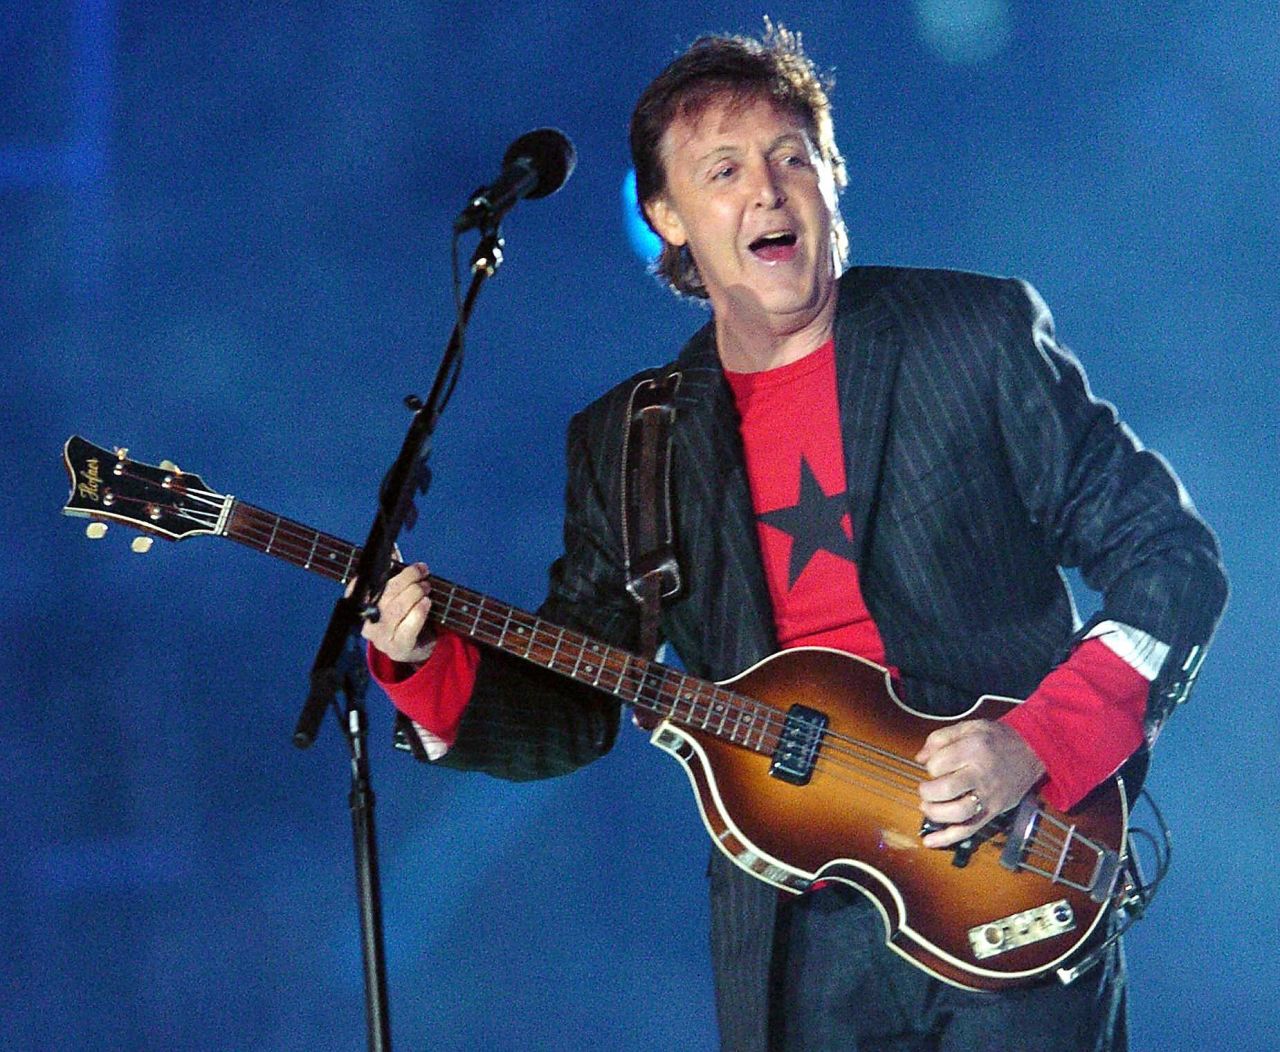 After Janet Jackson's "wardrobe malfunction" the year before, Paul McCartney's 2005 performance was a show everyone could get behind. McCartney took the stage to play fan favorites such as "Live and Let Die," "Drive My Car" and "Hey Jude."